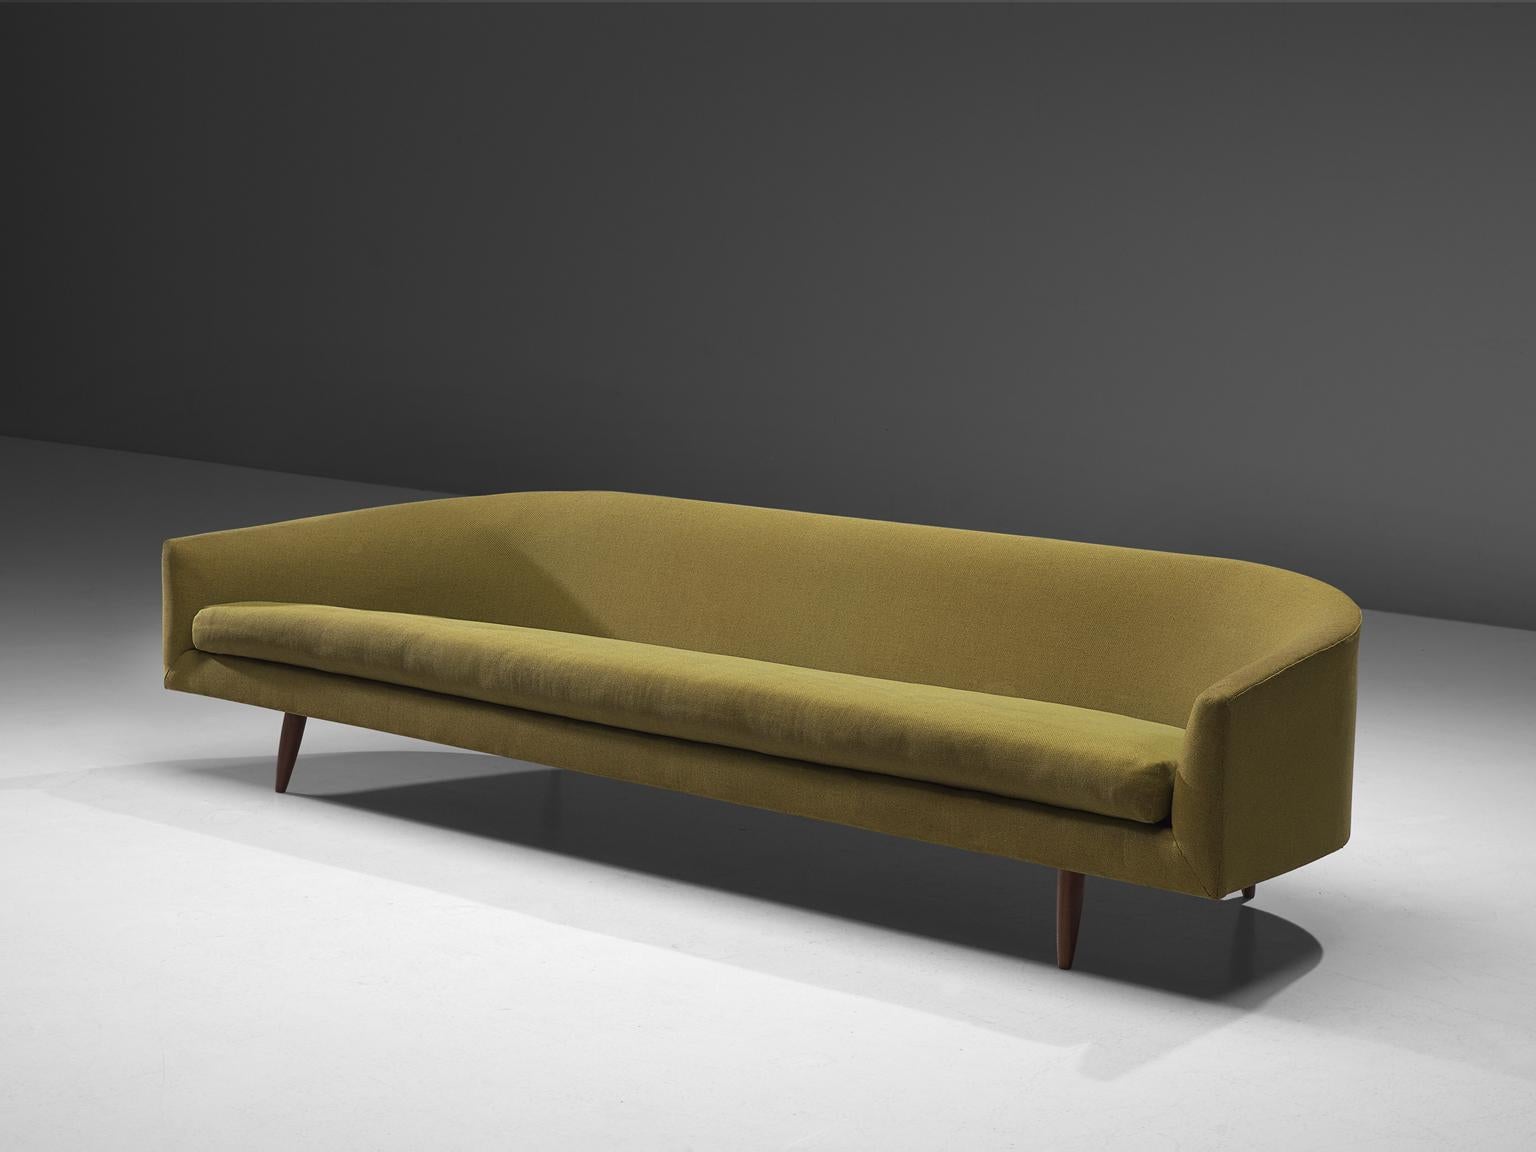 Adrian Pearsall for Craft Associates, Cloud sofa model 2474-S, oak and wood, United States, circa 1960s

This very large sofa is designed by Adrian Pearsall. This design shows elegant lines. The armrests run smoothly all around the chair and sofa